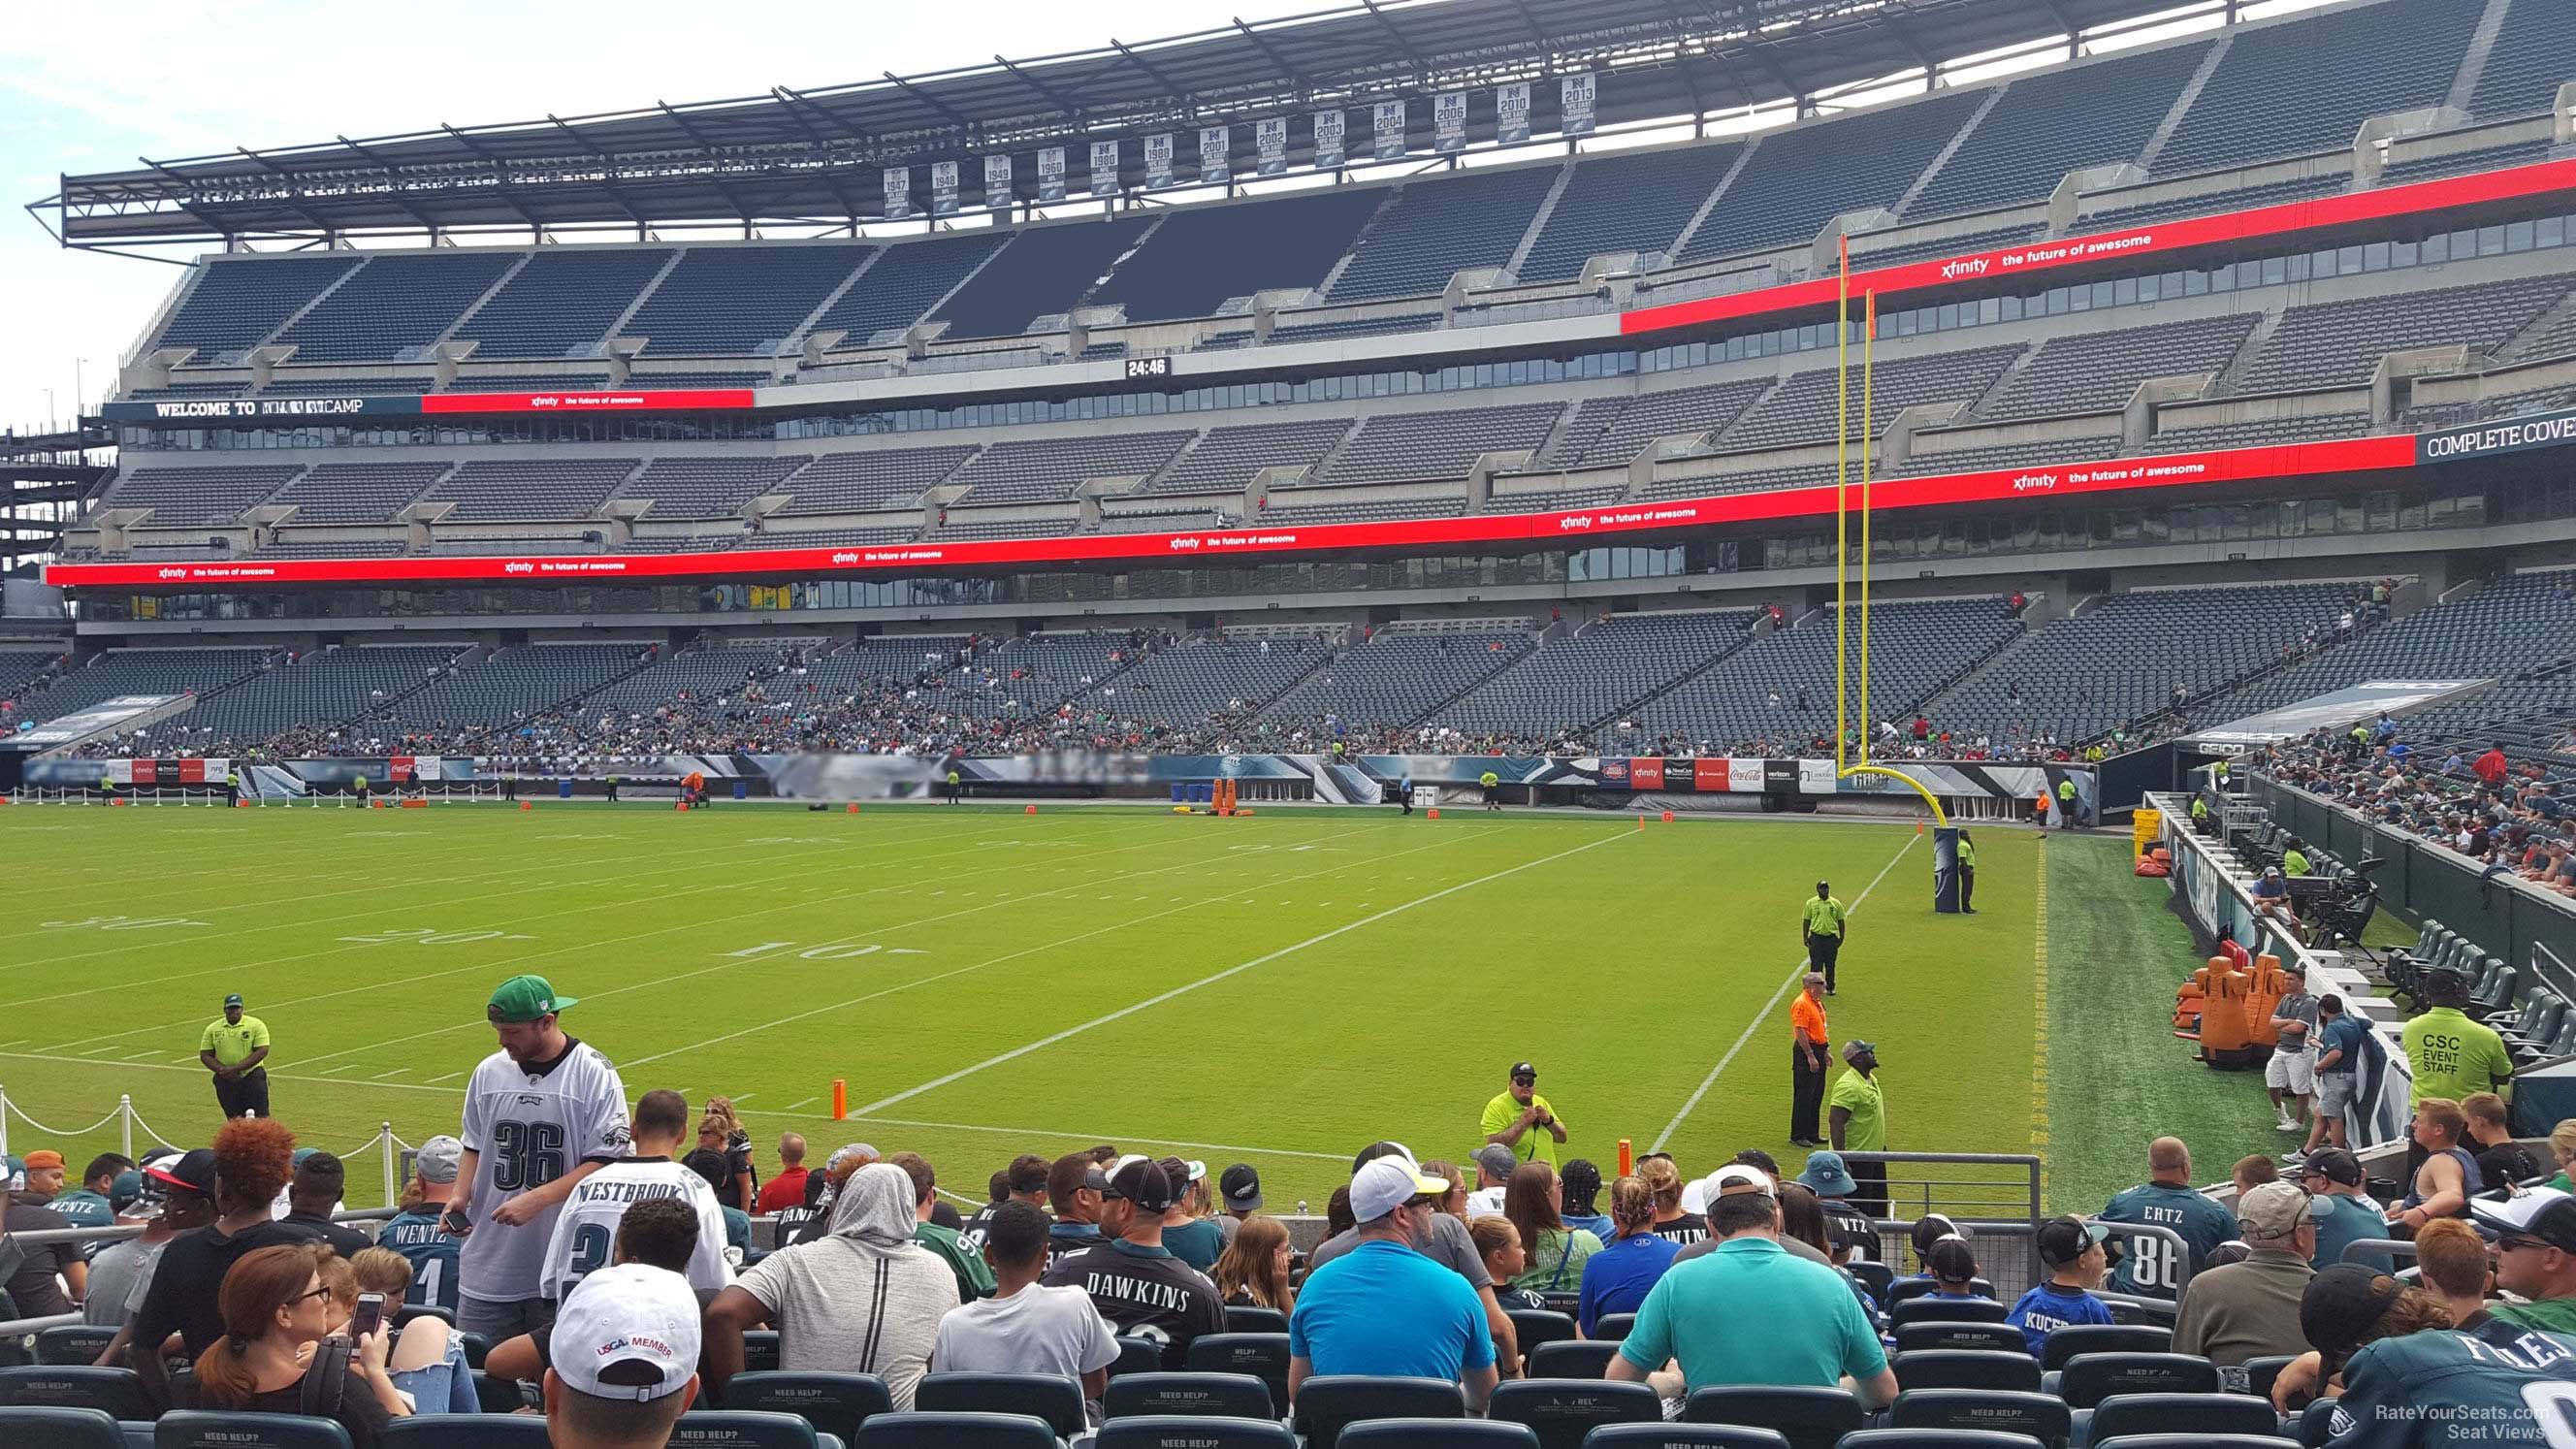 section 106, row 12 seat view  for football - lincoln financial field